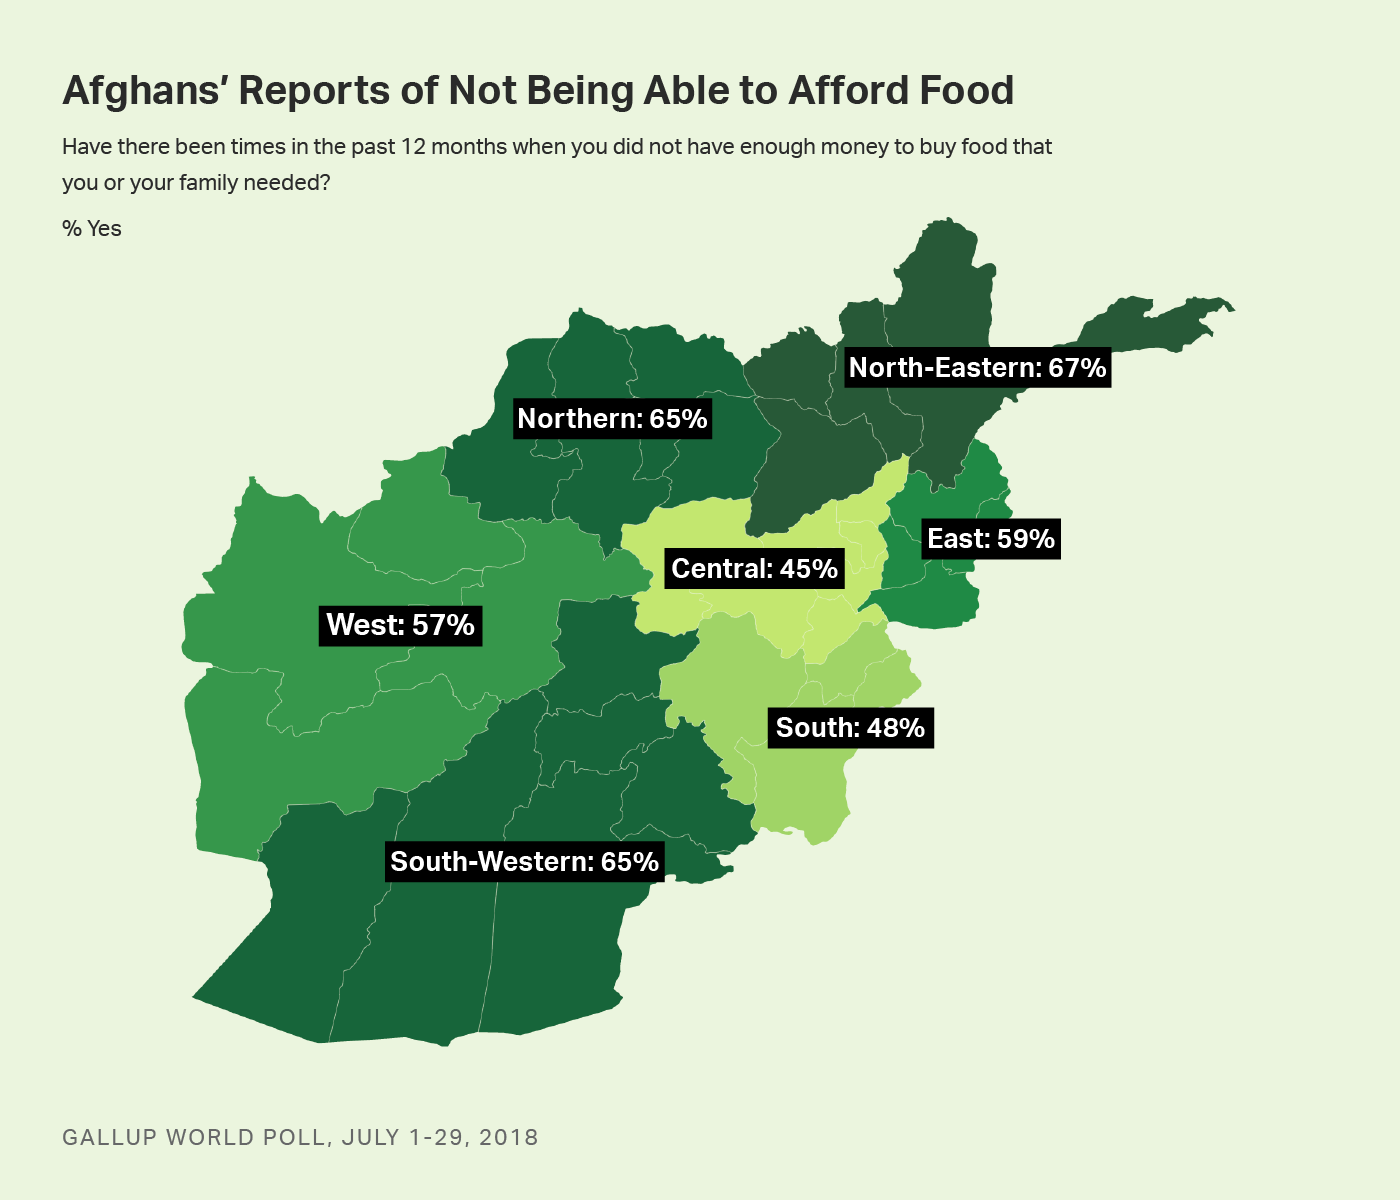 Heat map. The percentages of Afghans who struggled to afford food by region. 